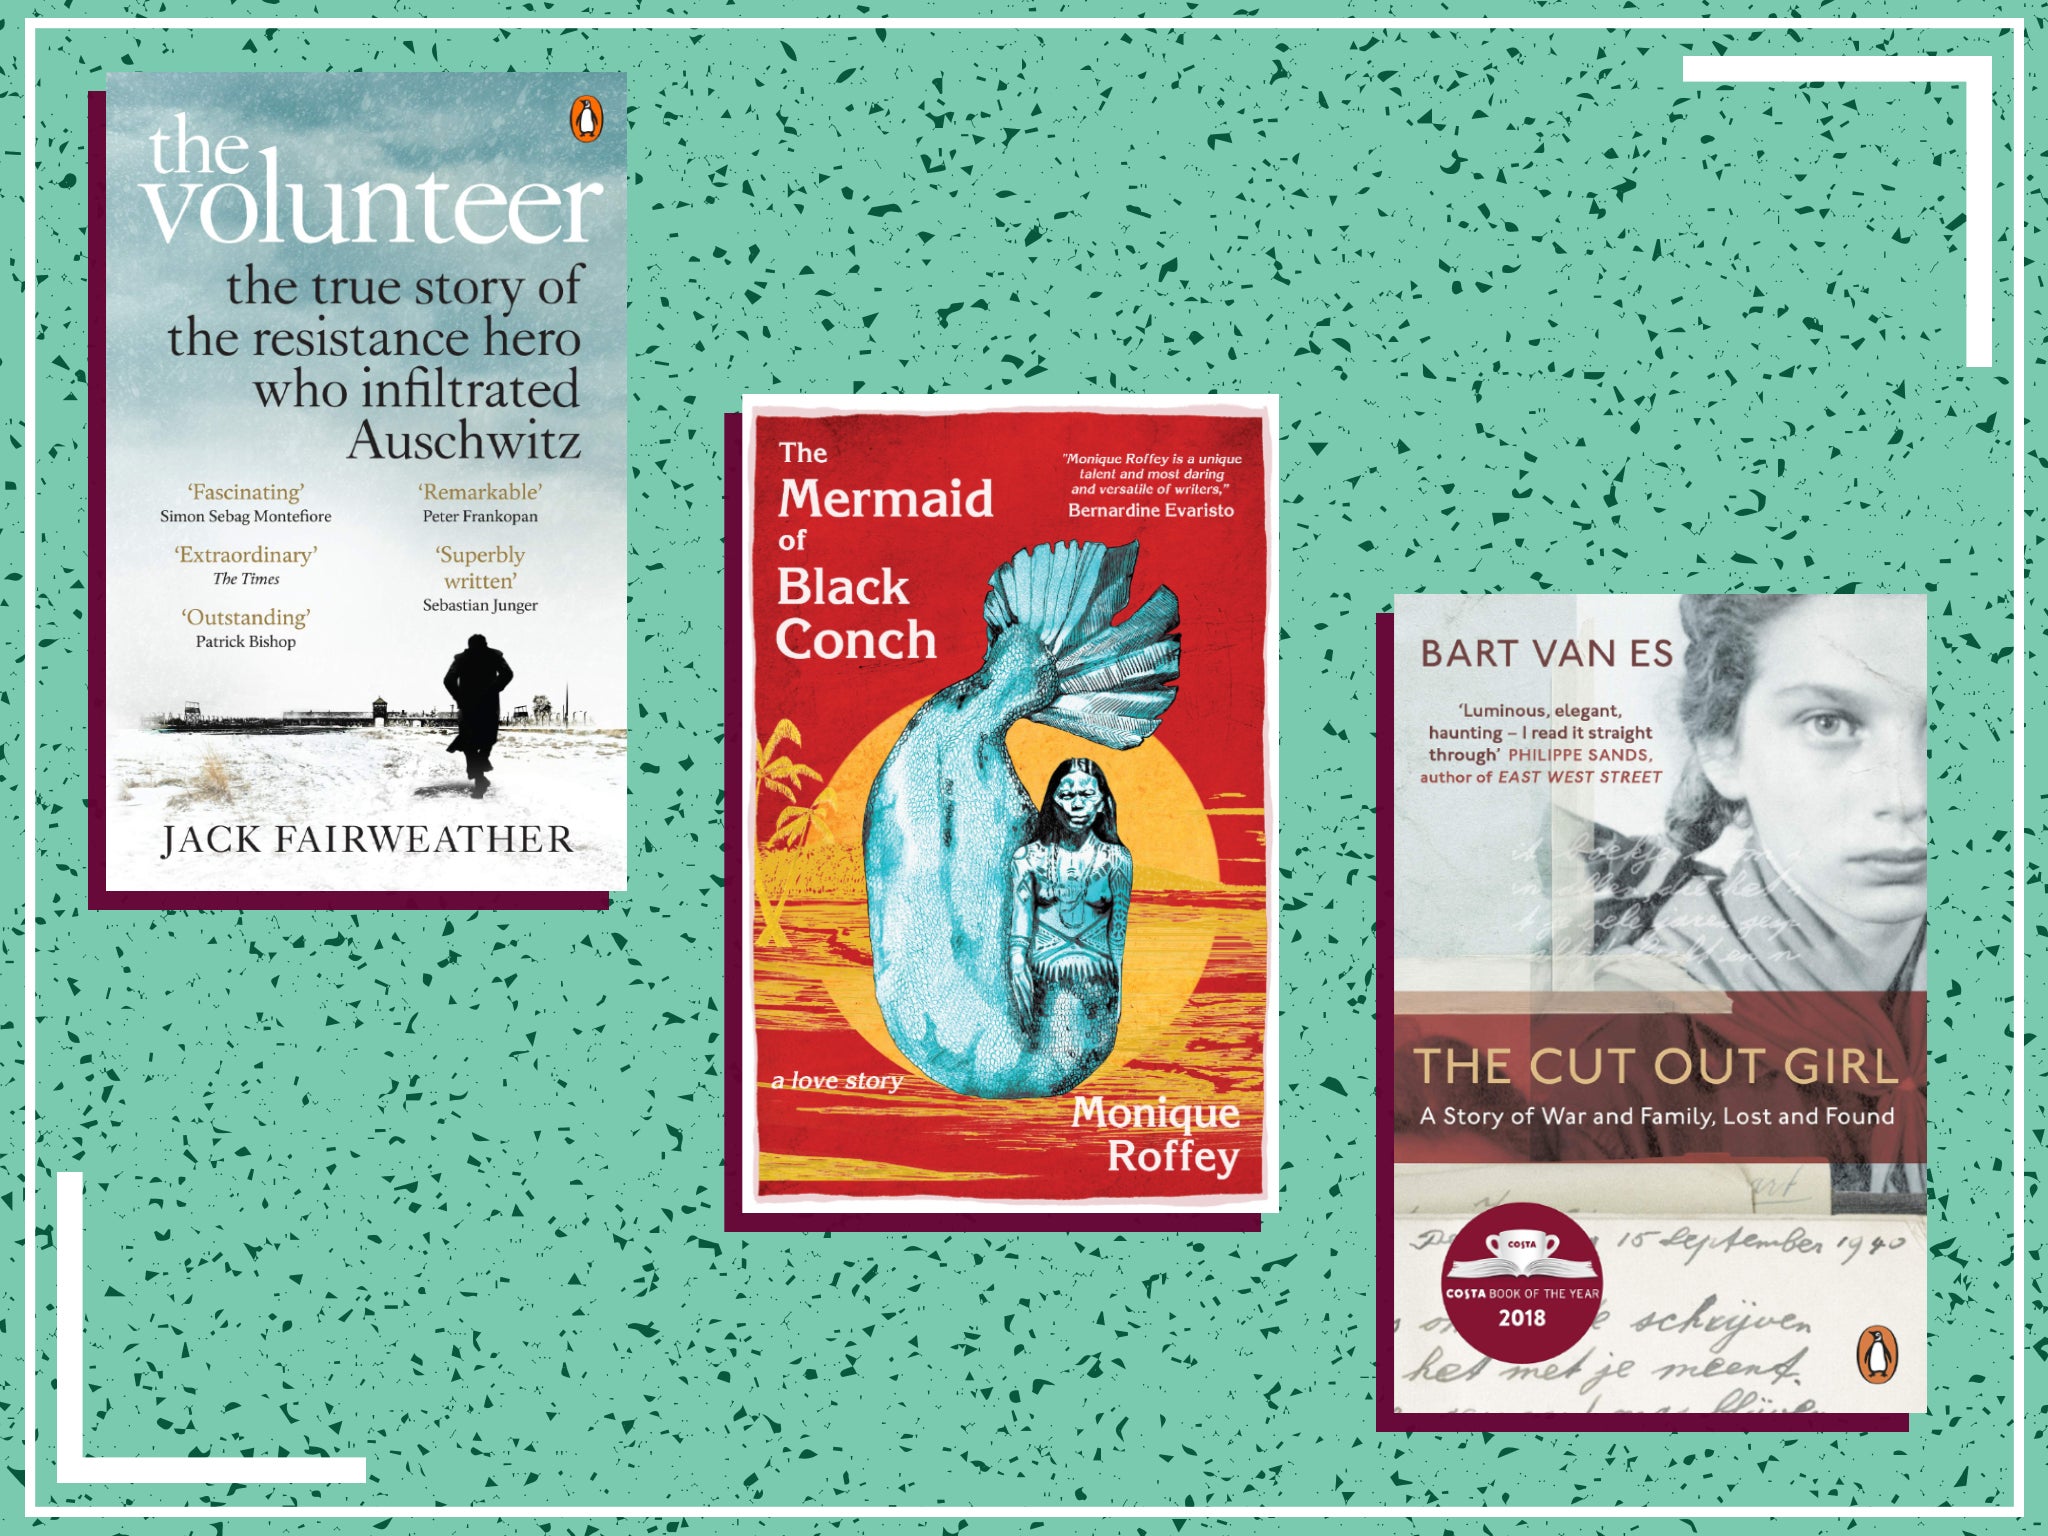 Discover more of the best British books, from poetry to biographies